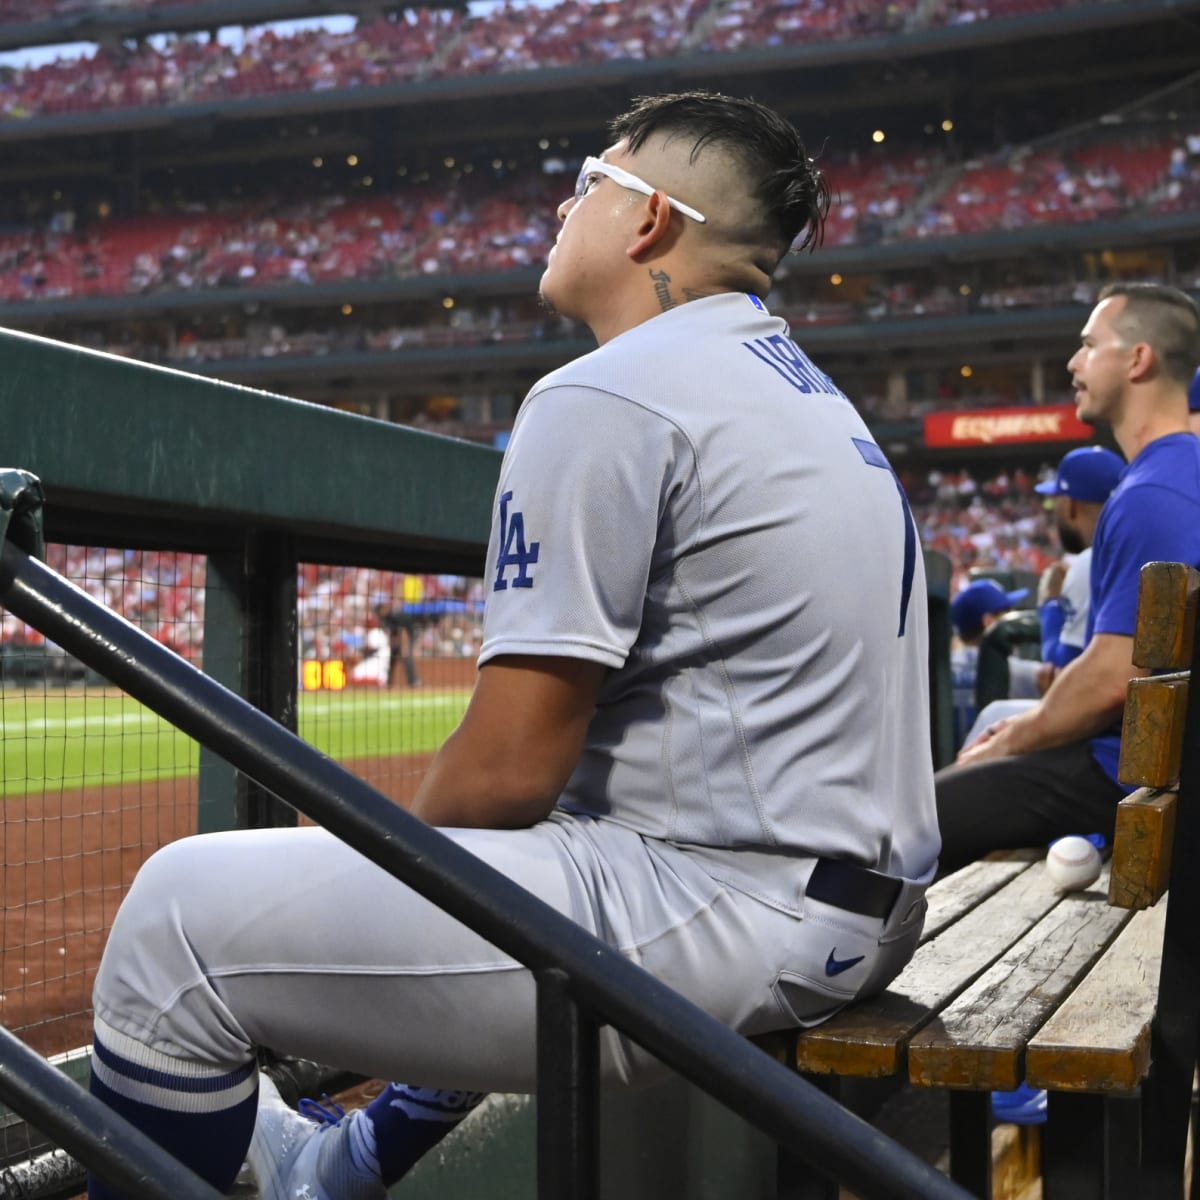 FAX Sports: MLB on X: What jersey will Julio Urias put on next